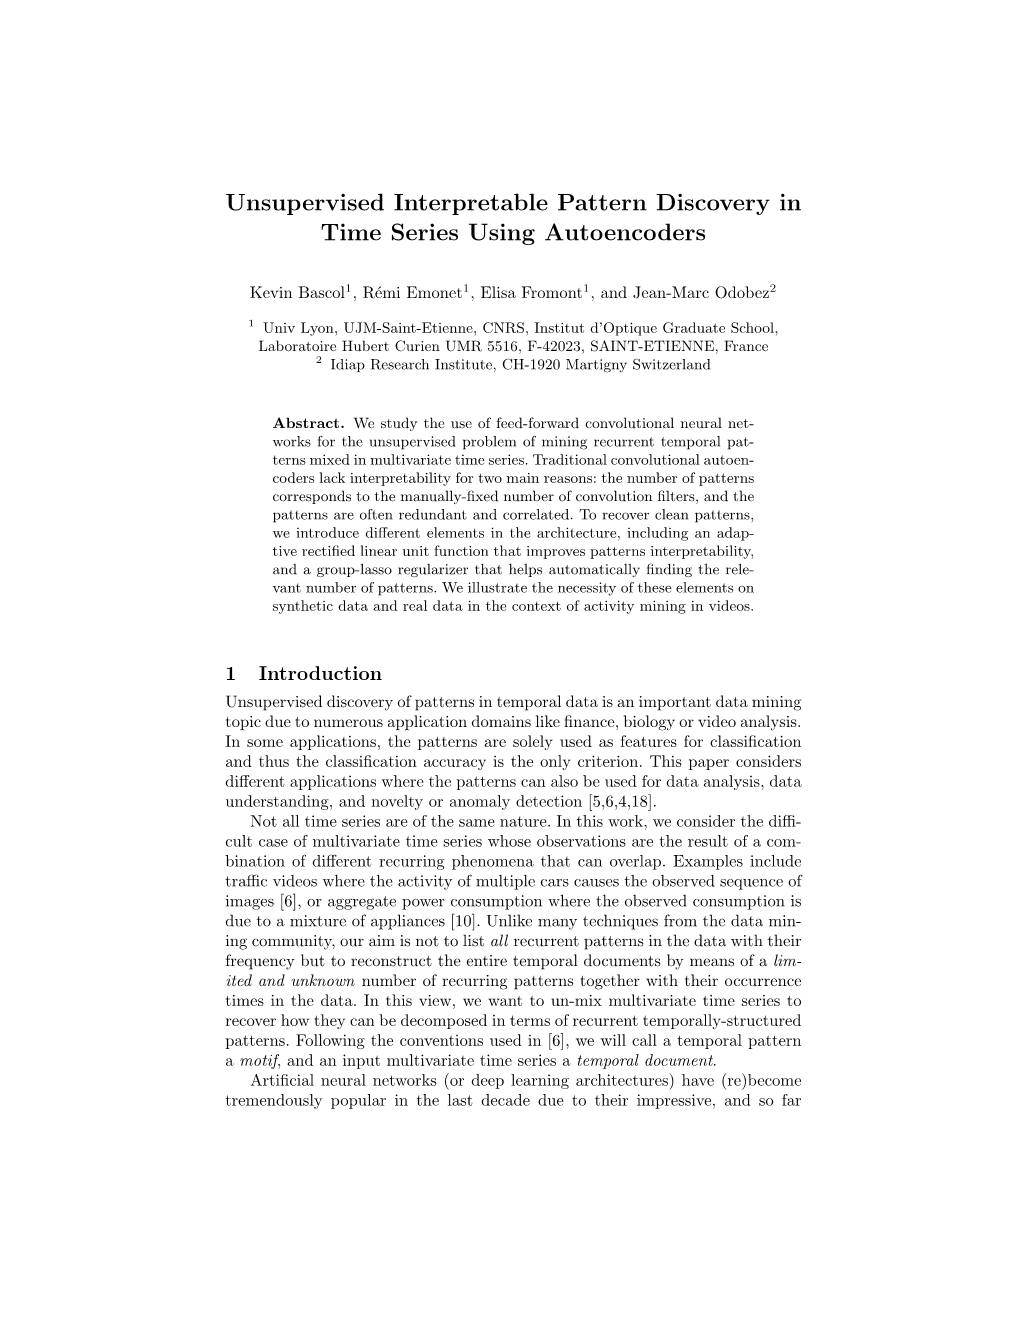 Unsupervised Interpretable Pattern Discovery in Time Series Using Autoencoders